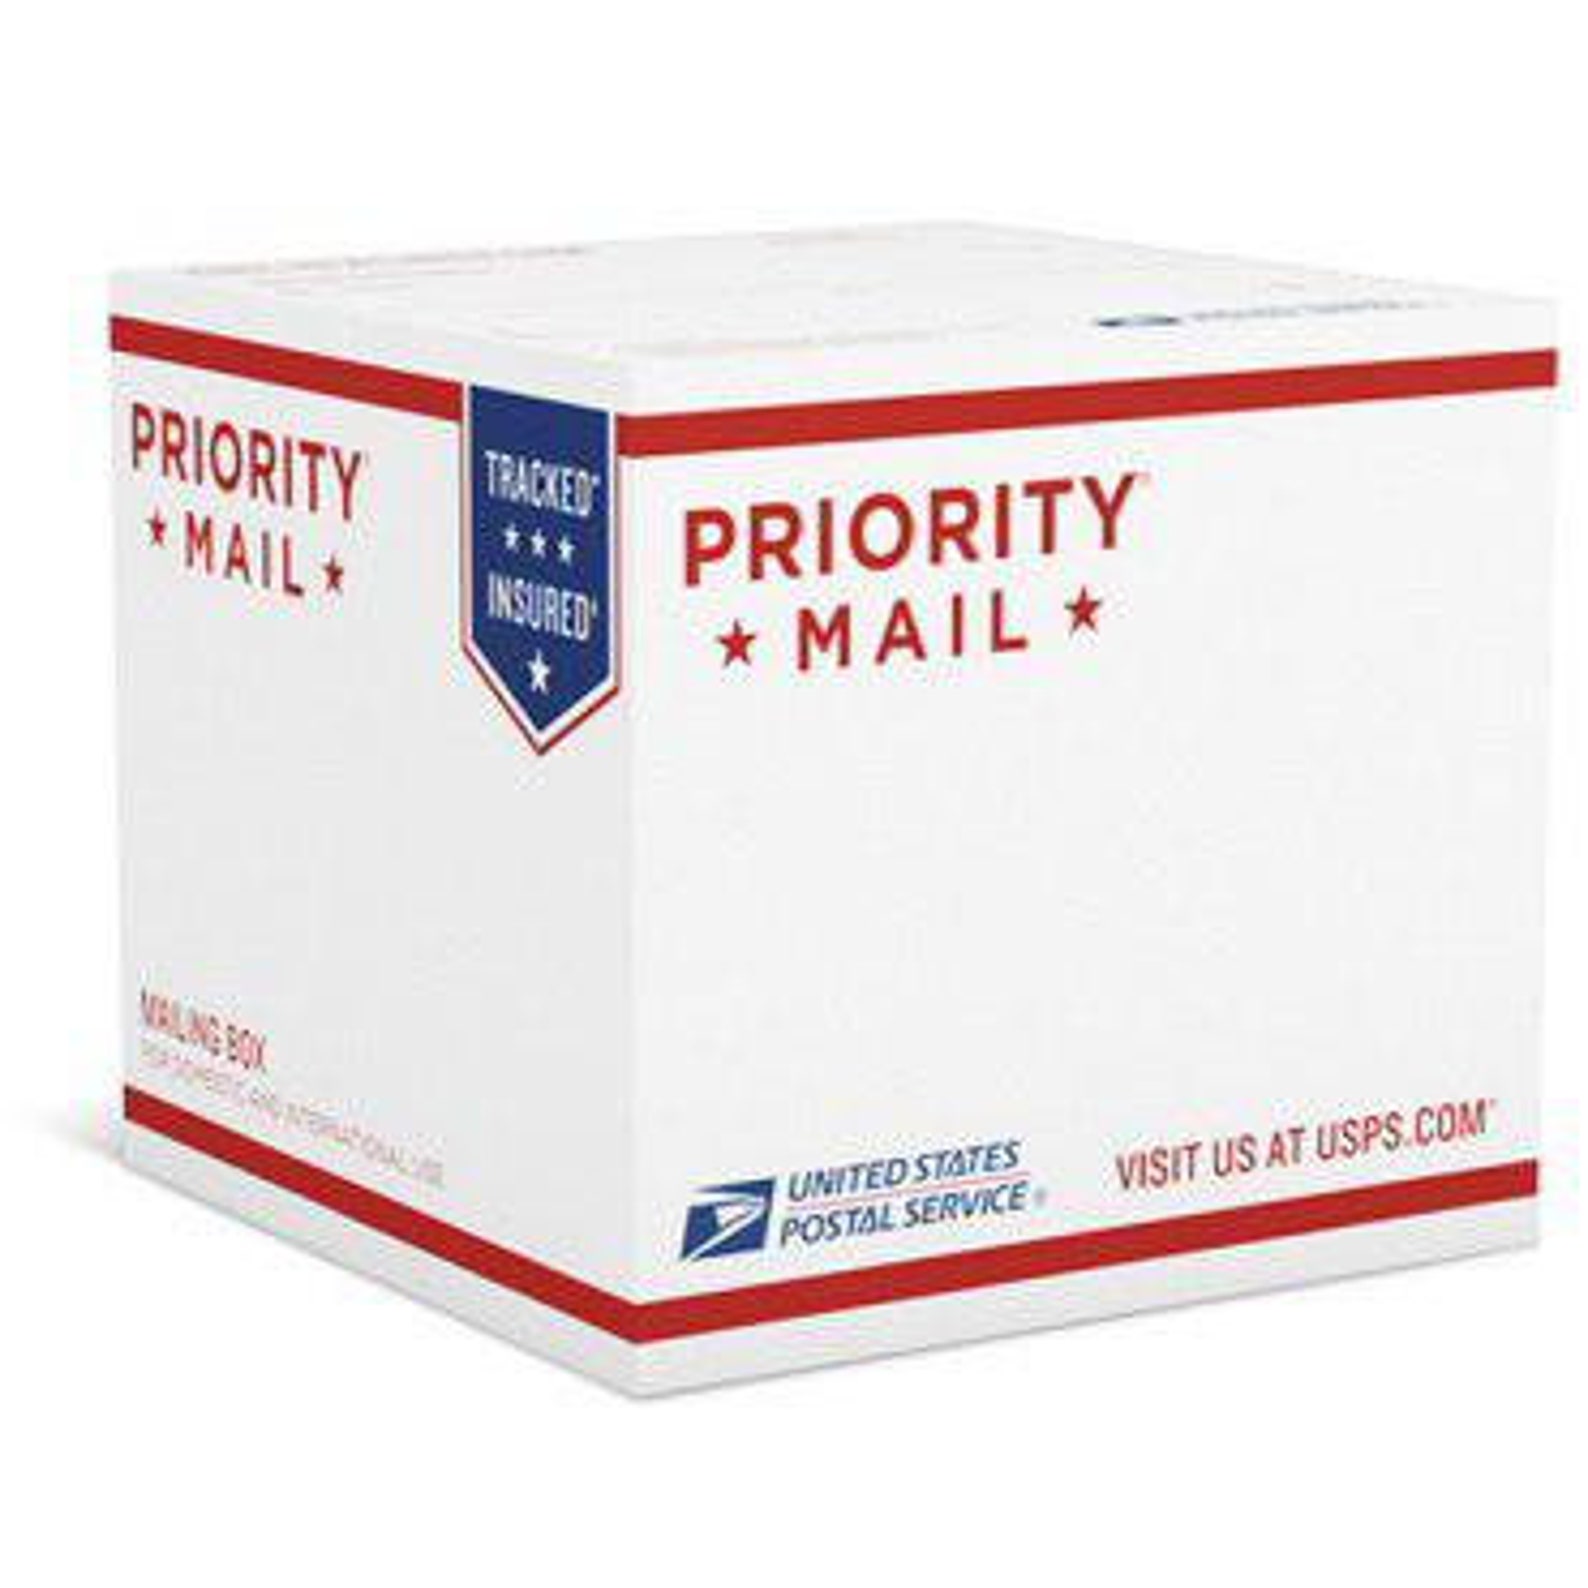 T me usps boxing. Priority mail. Стикеры priority mail. USA priority mail. USPS shipping.